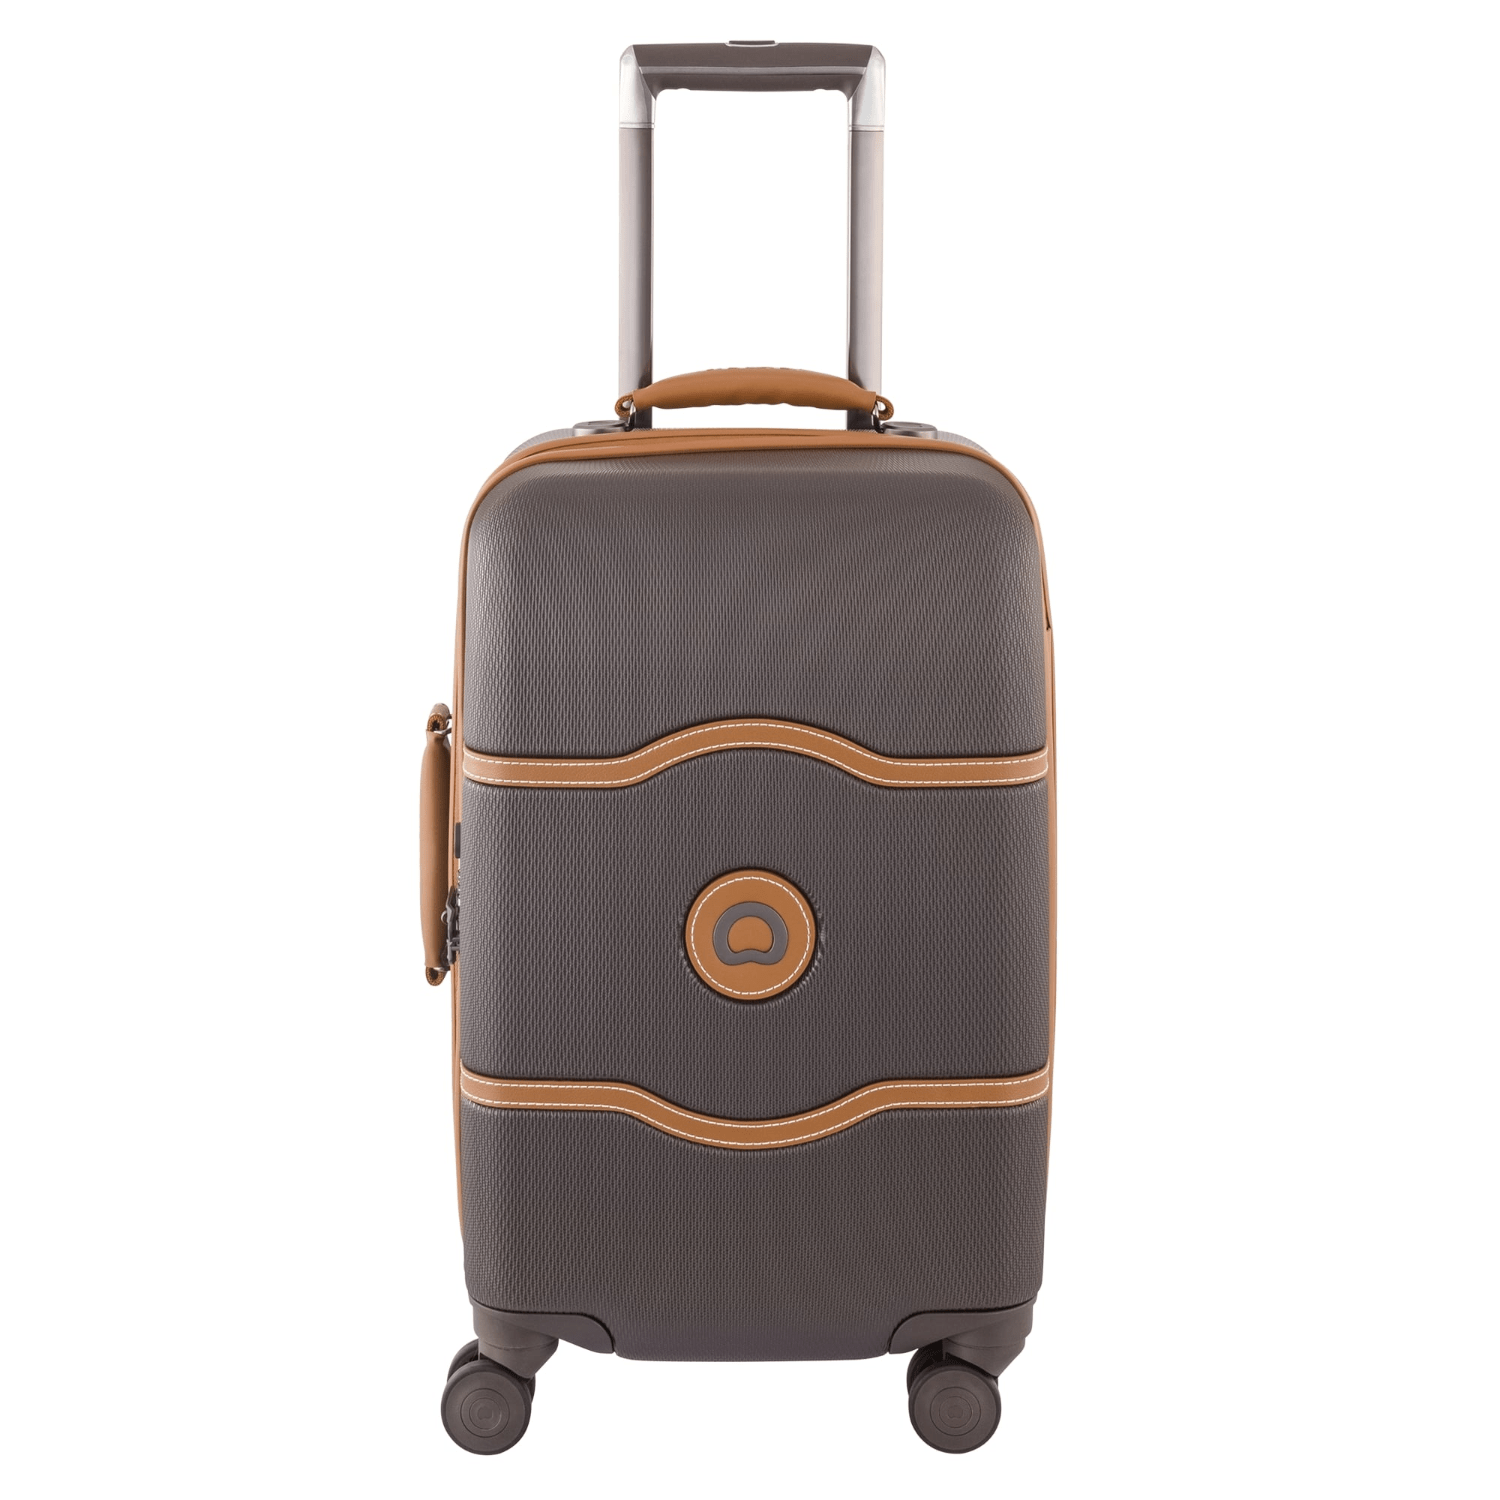 Delsey Chatelet 55cm Hardcase 4 Double Wheel Cabin Luggage Trolley Chocolate - 3219110362466